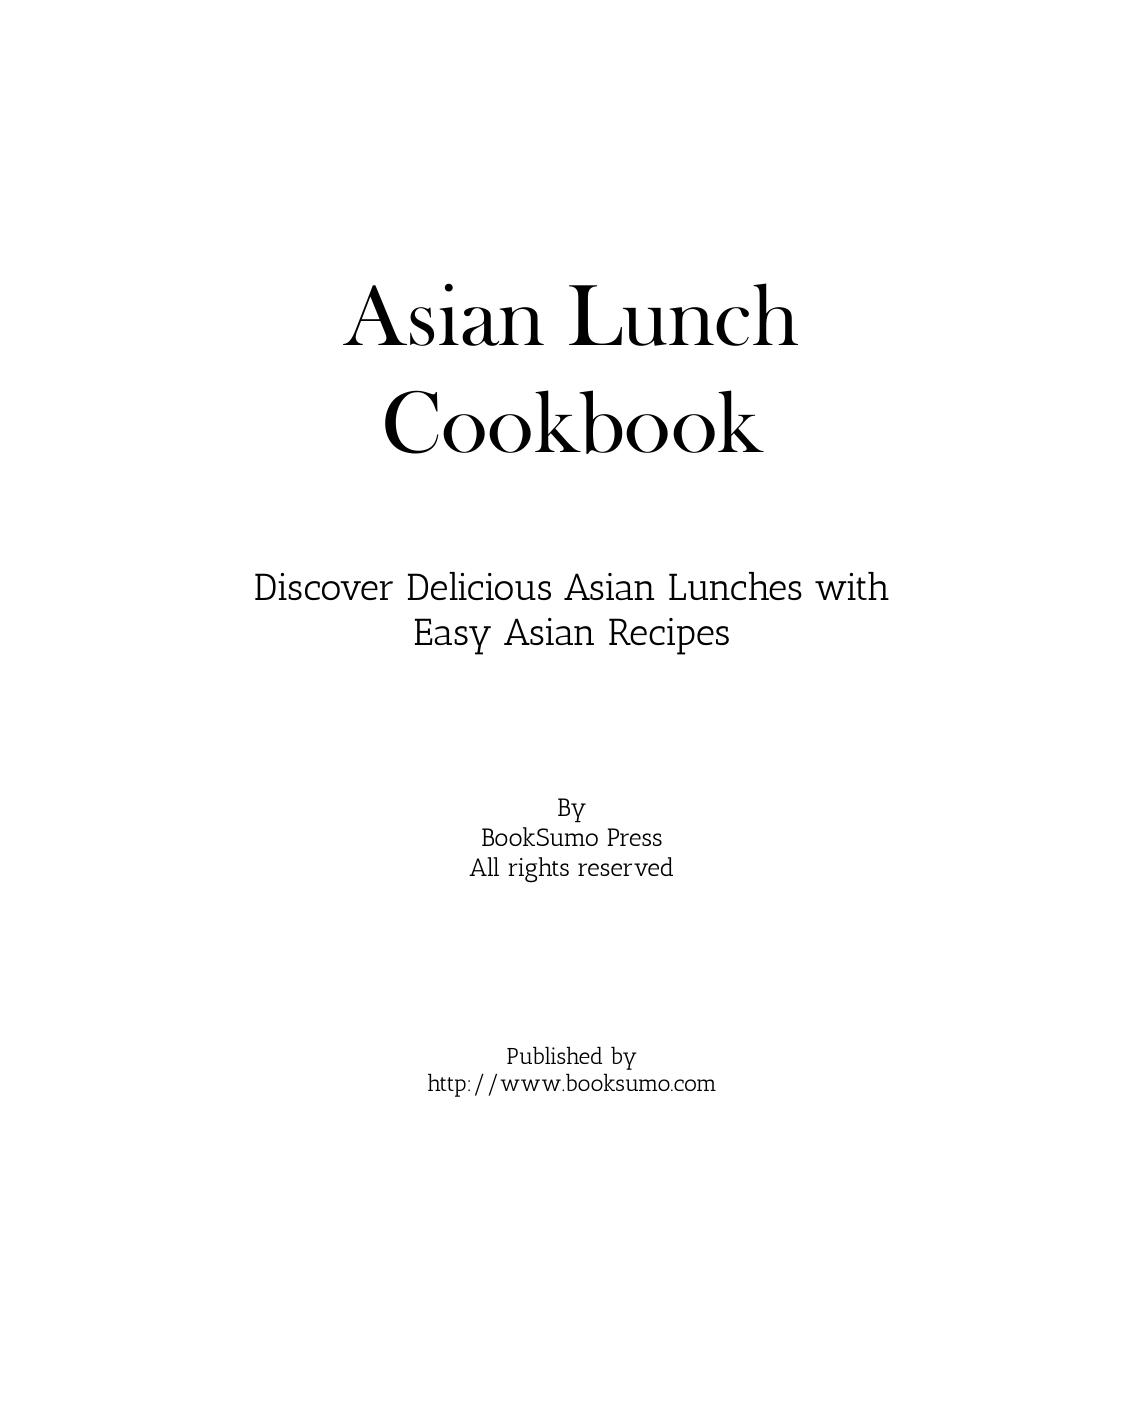 Asian Lunch Cookbook: Discover Delicious Asian Lunches with Easy Oriental Recipes by BookSumo Press